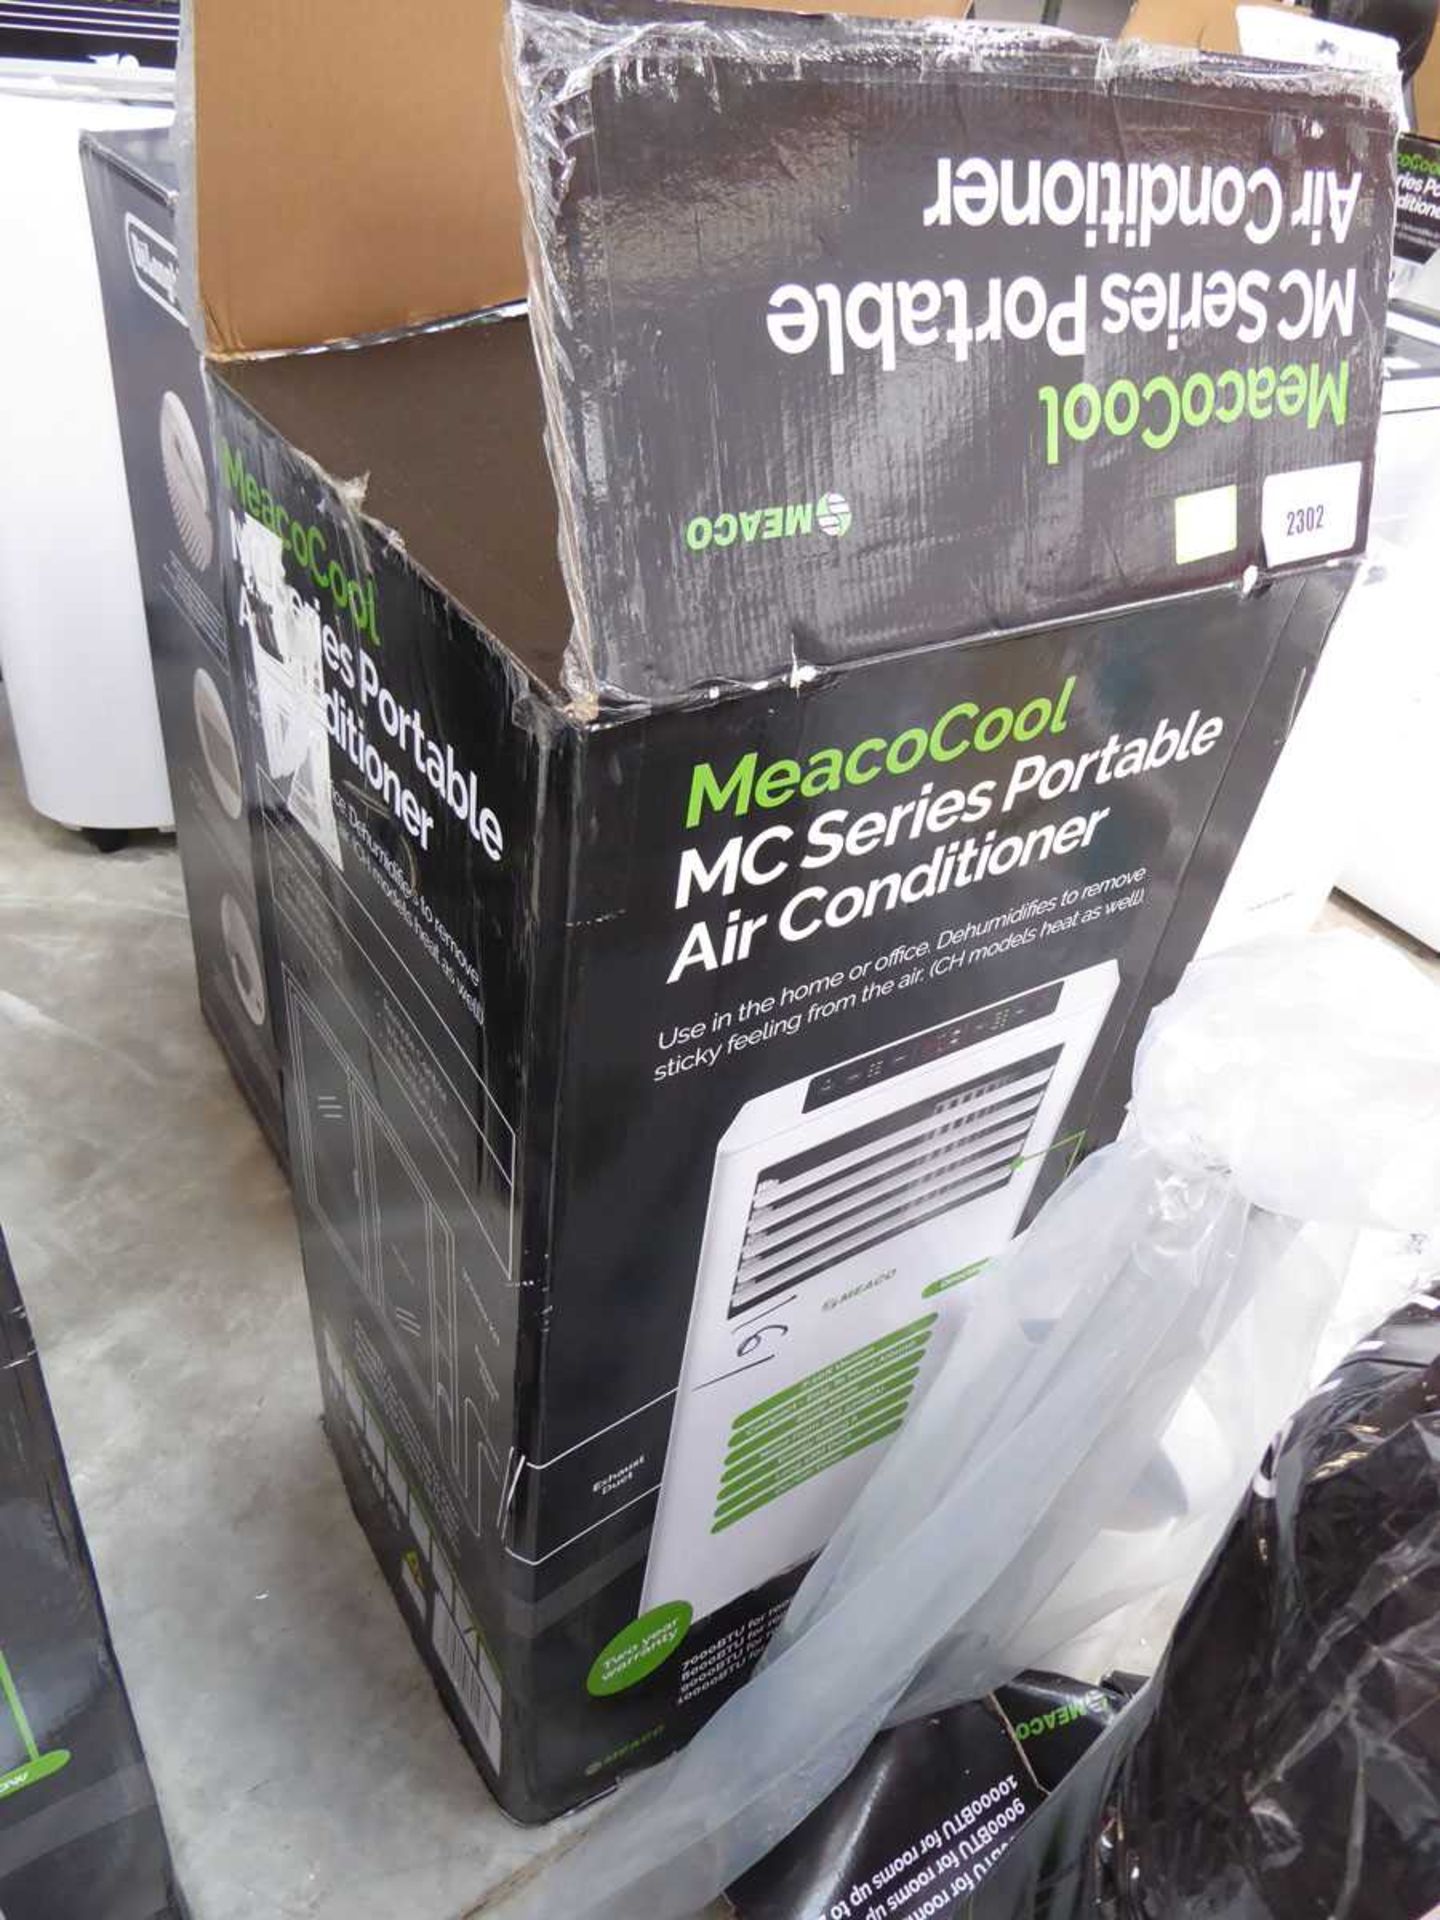 +VAT Boxed MeacoCool MC Series portable air conditioning unit